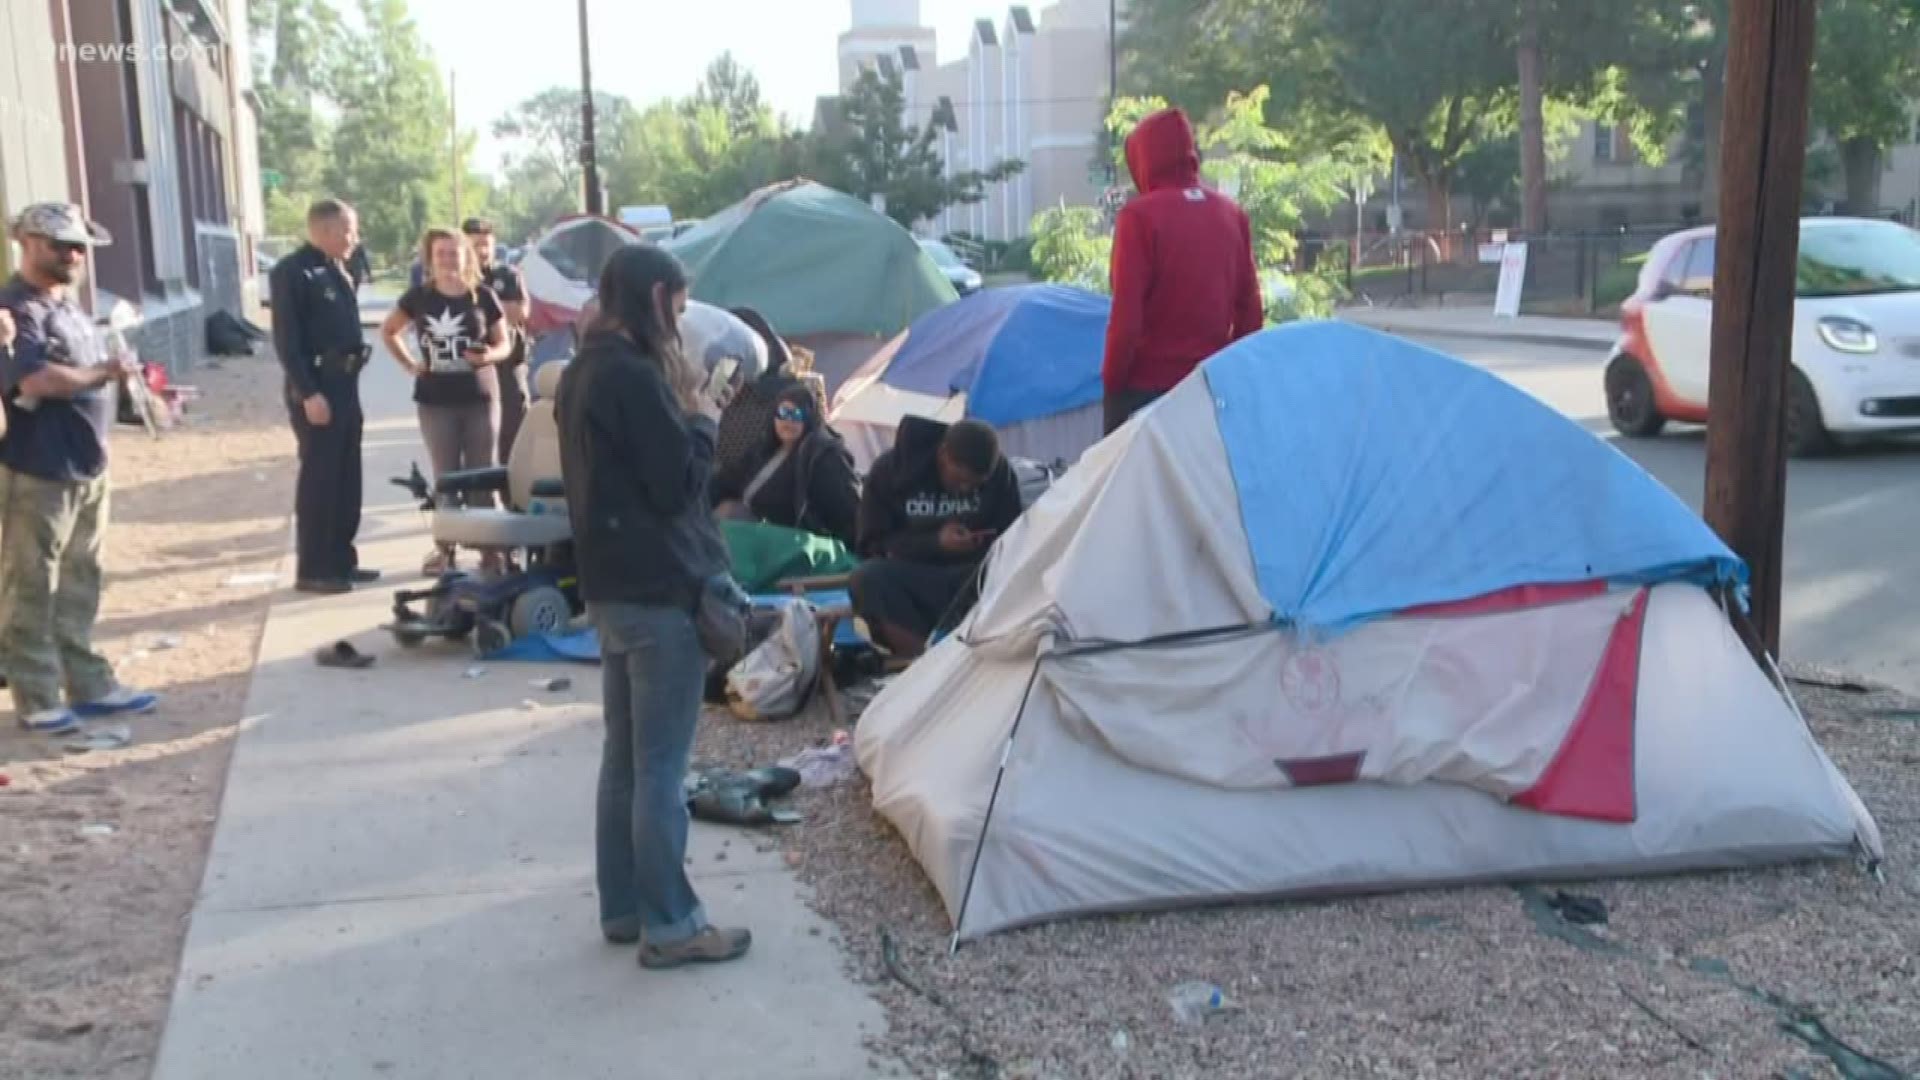 Denver Rescue Mission - Help people experiencing homelessness today.